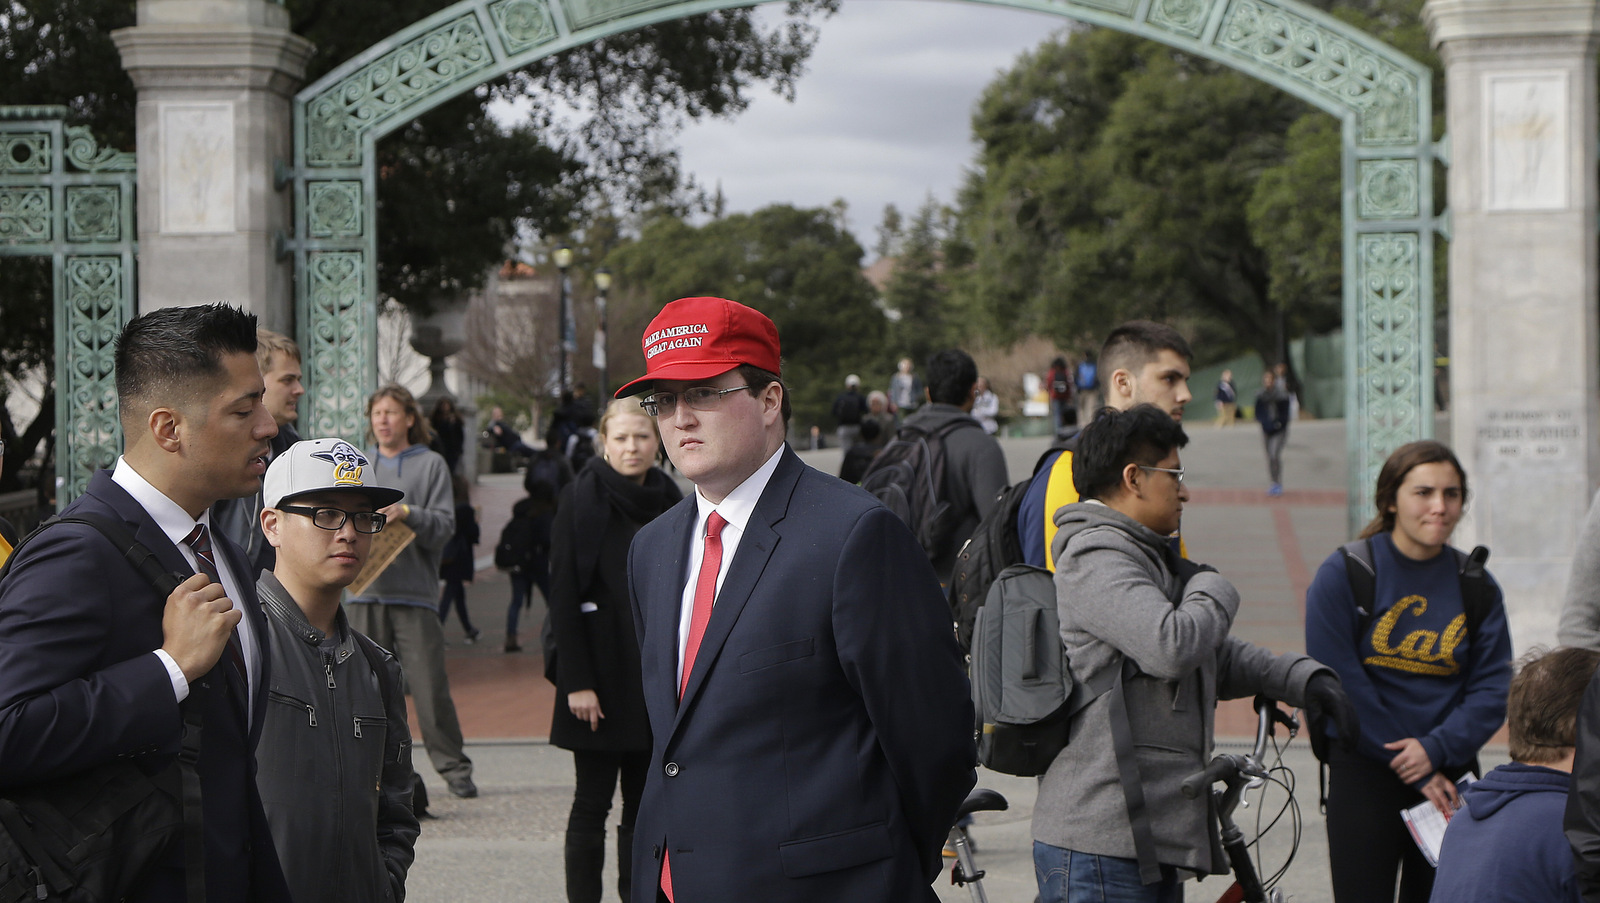 University of California, Berkeley, student Jack Palkovic, center, stands with others near a Berkeley College Republicans table in front of Sather Gate on campus in Berkeley, Calif., Thursday, Feb. 2, 2017. Palkovic claims  he was attacked on the campus a day after protests led authorities to cancel a controversial speech. (AP/Jeff Chiu)